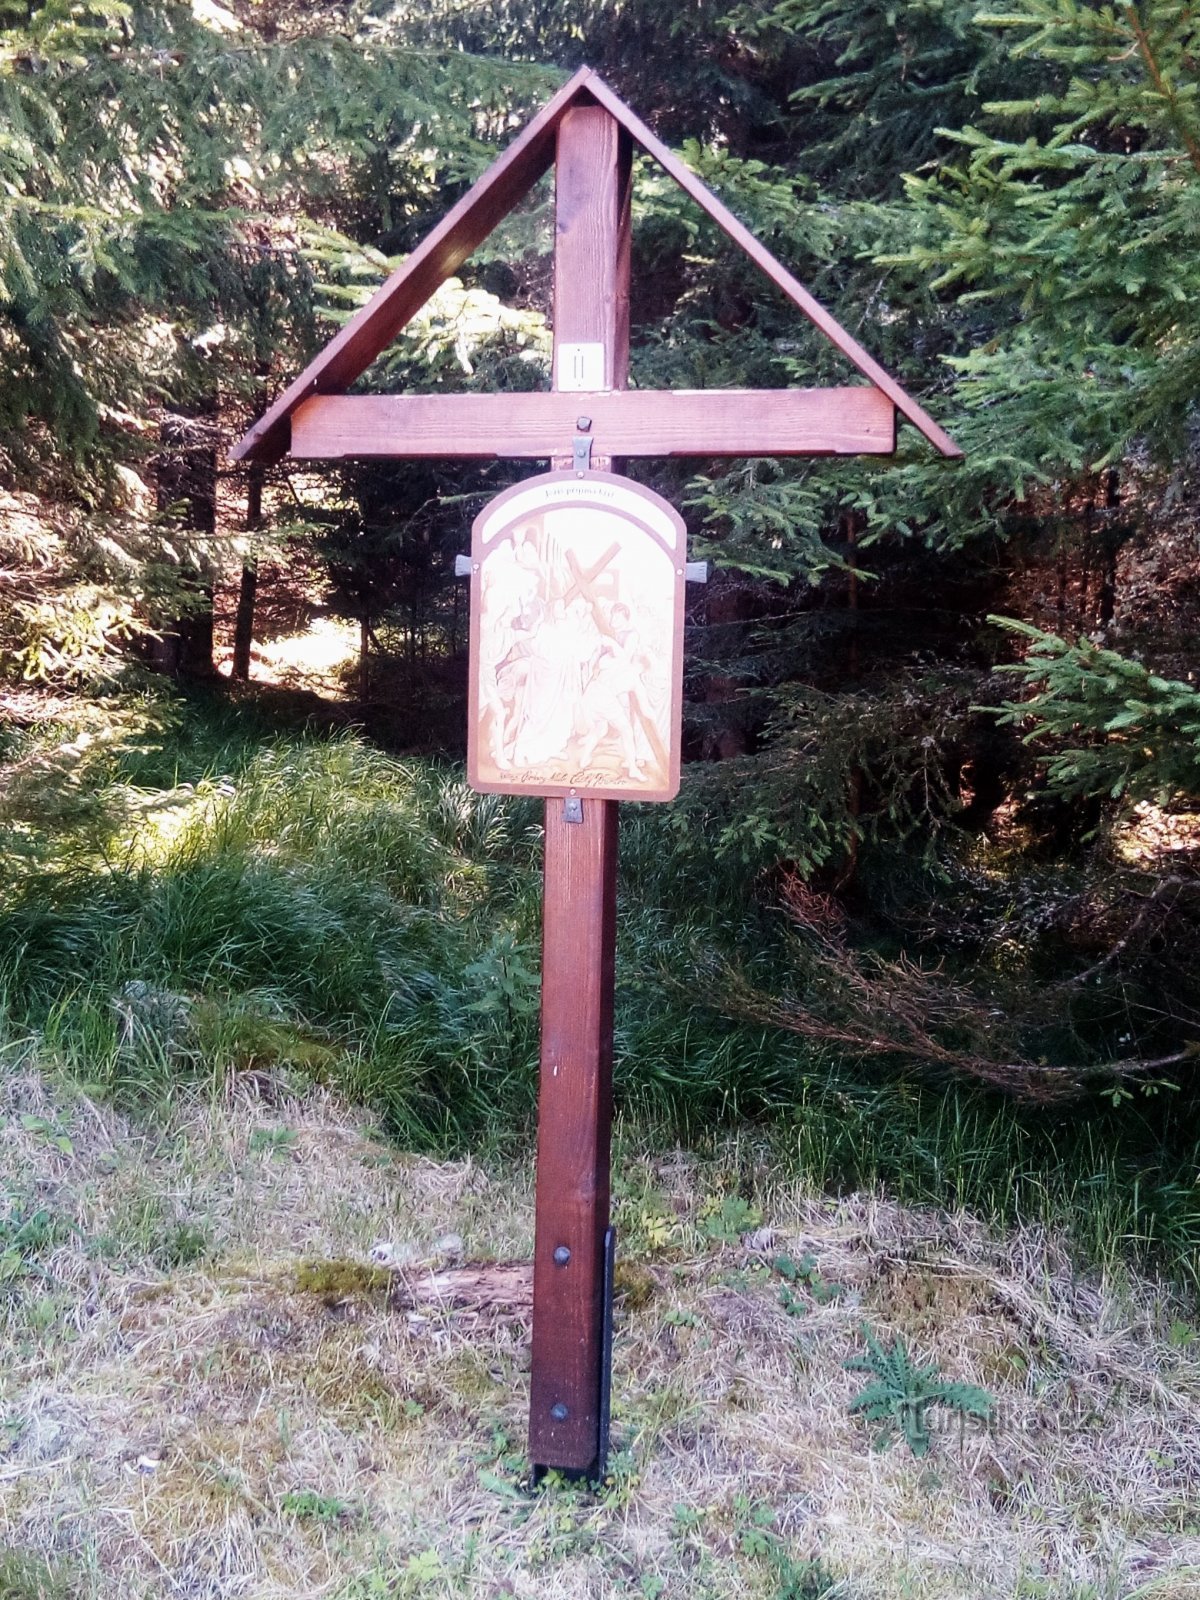 From Lenora to the Black Cross via the restored Stations of the Cross and the Stožecka Chapel